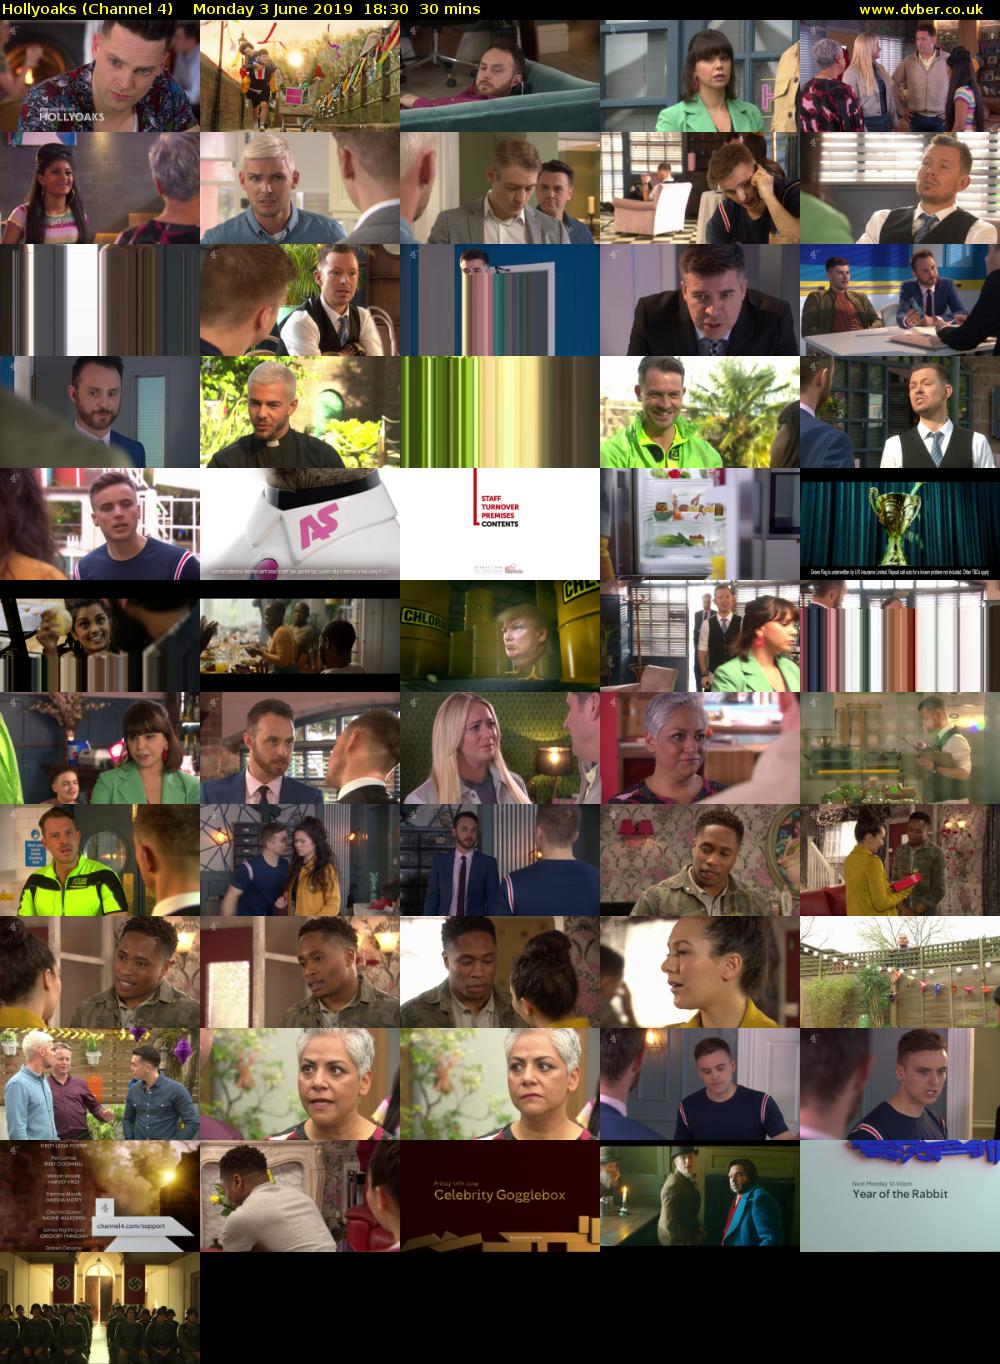 Hollyoaks (Channel 4) Monday 3 June 2019 18:30 - 19:00